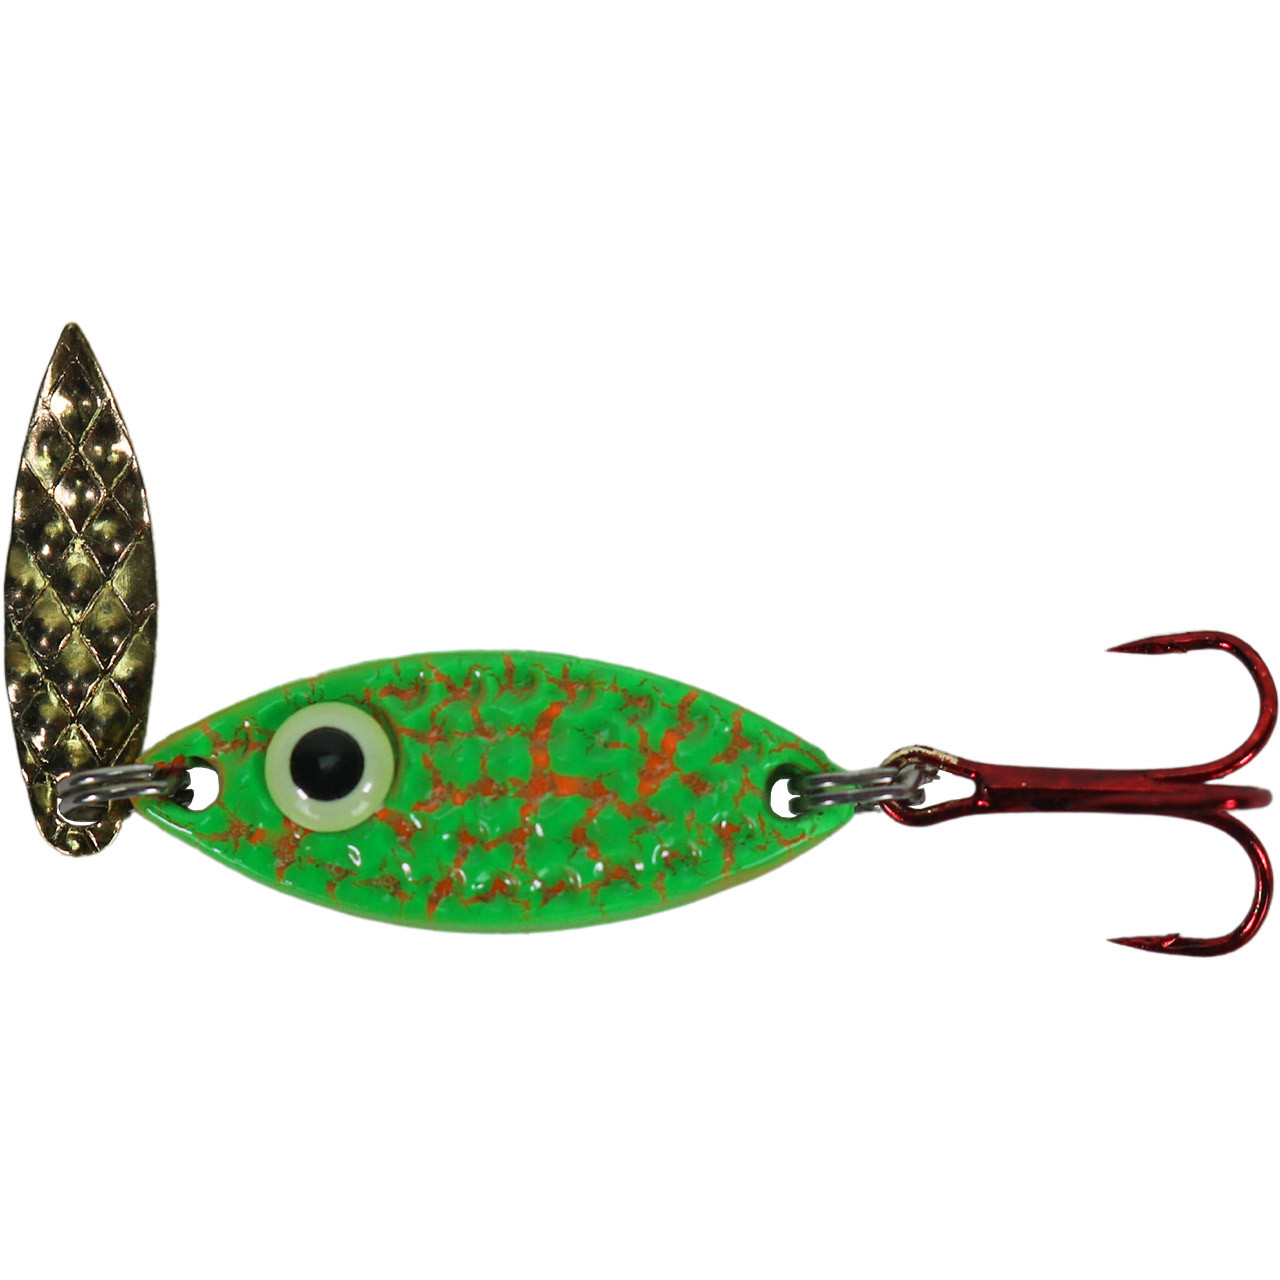 Fishing Lures for Trout and Bass - Classic License Plates